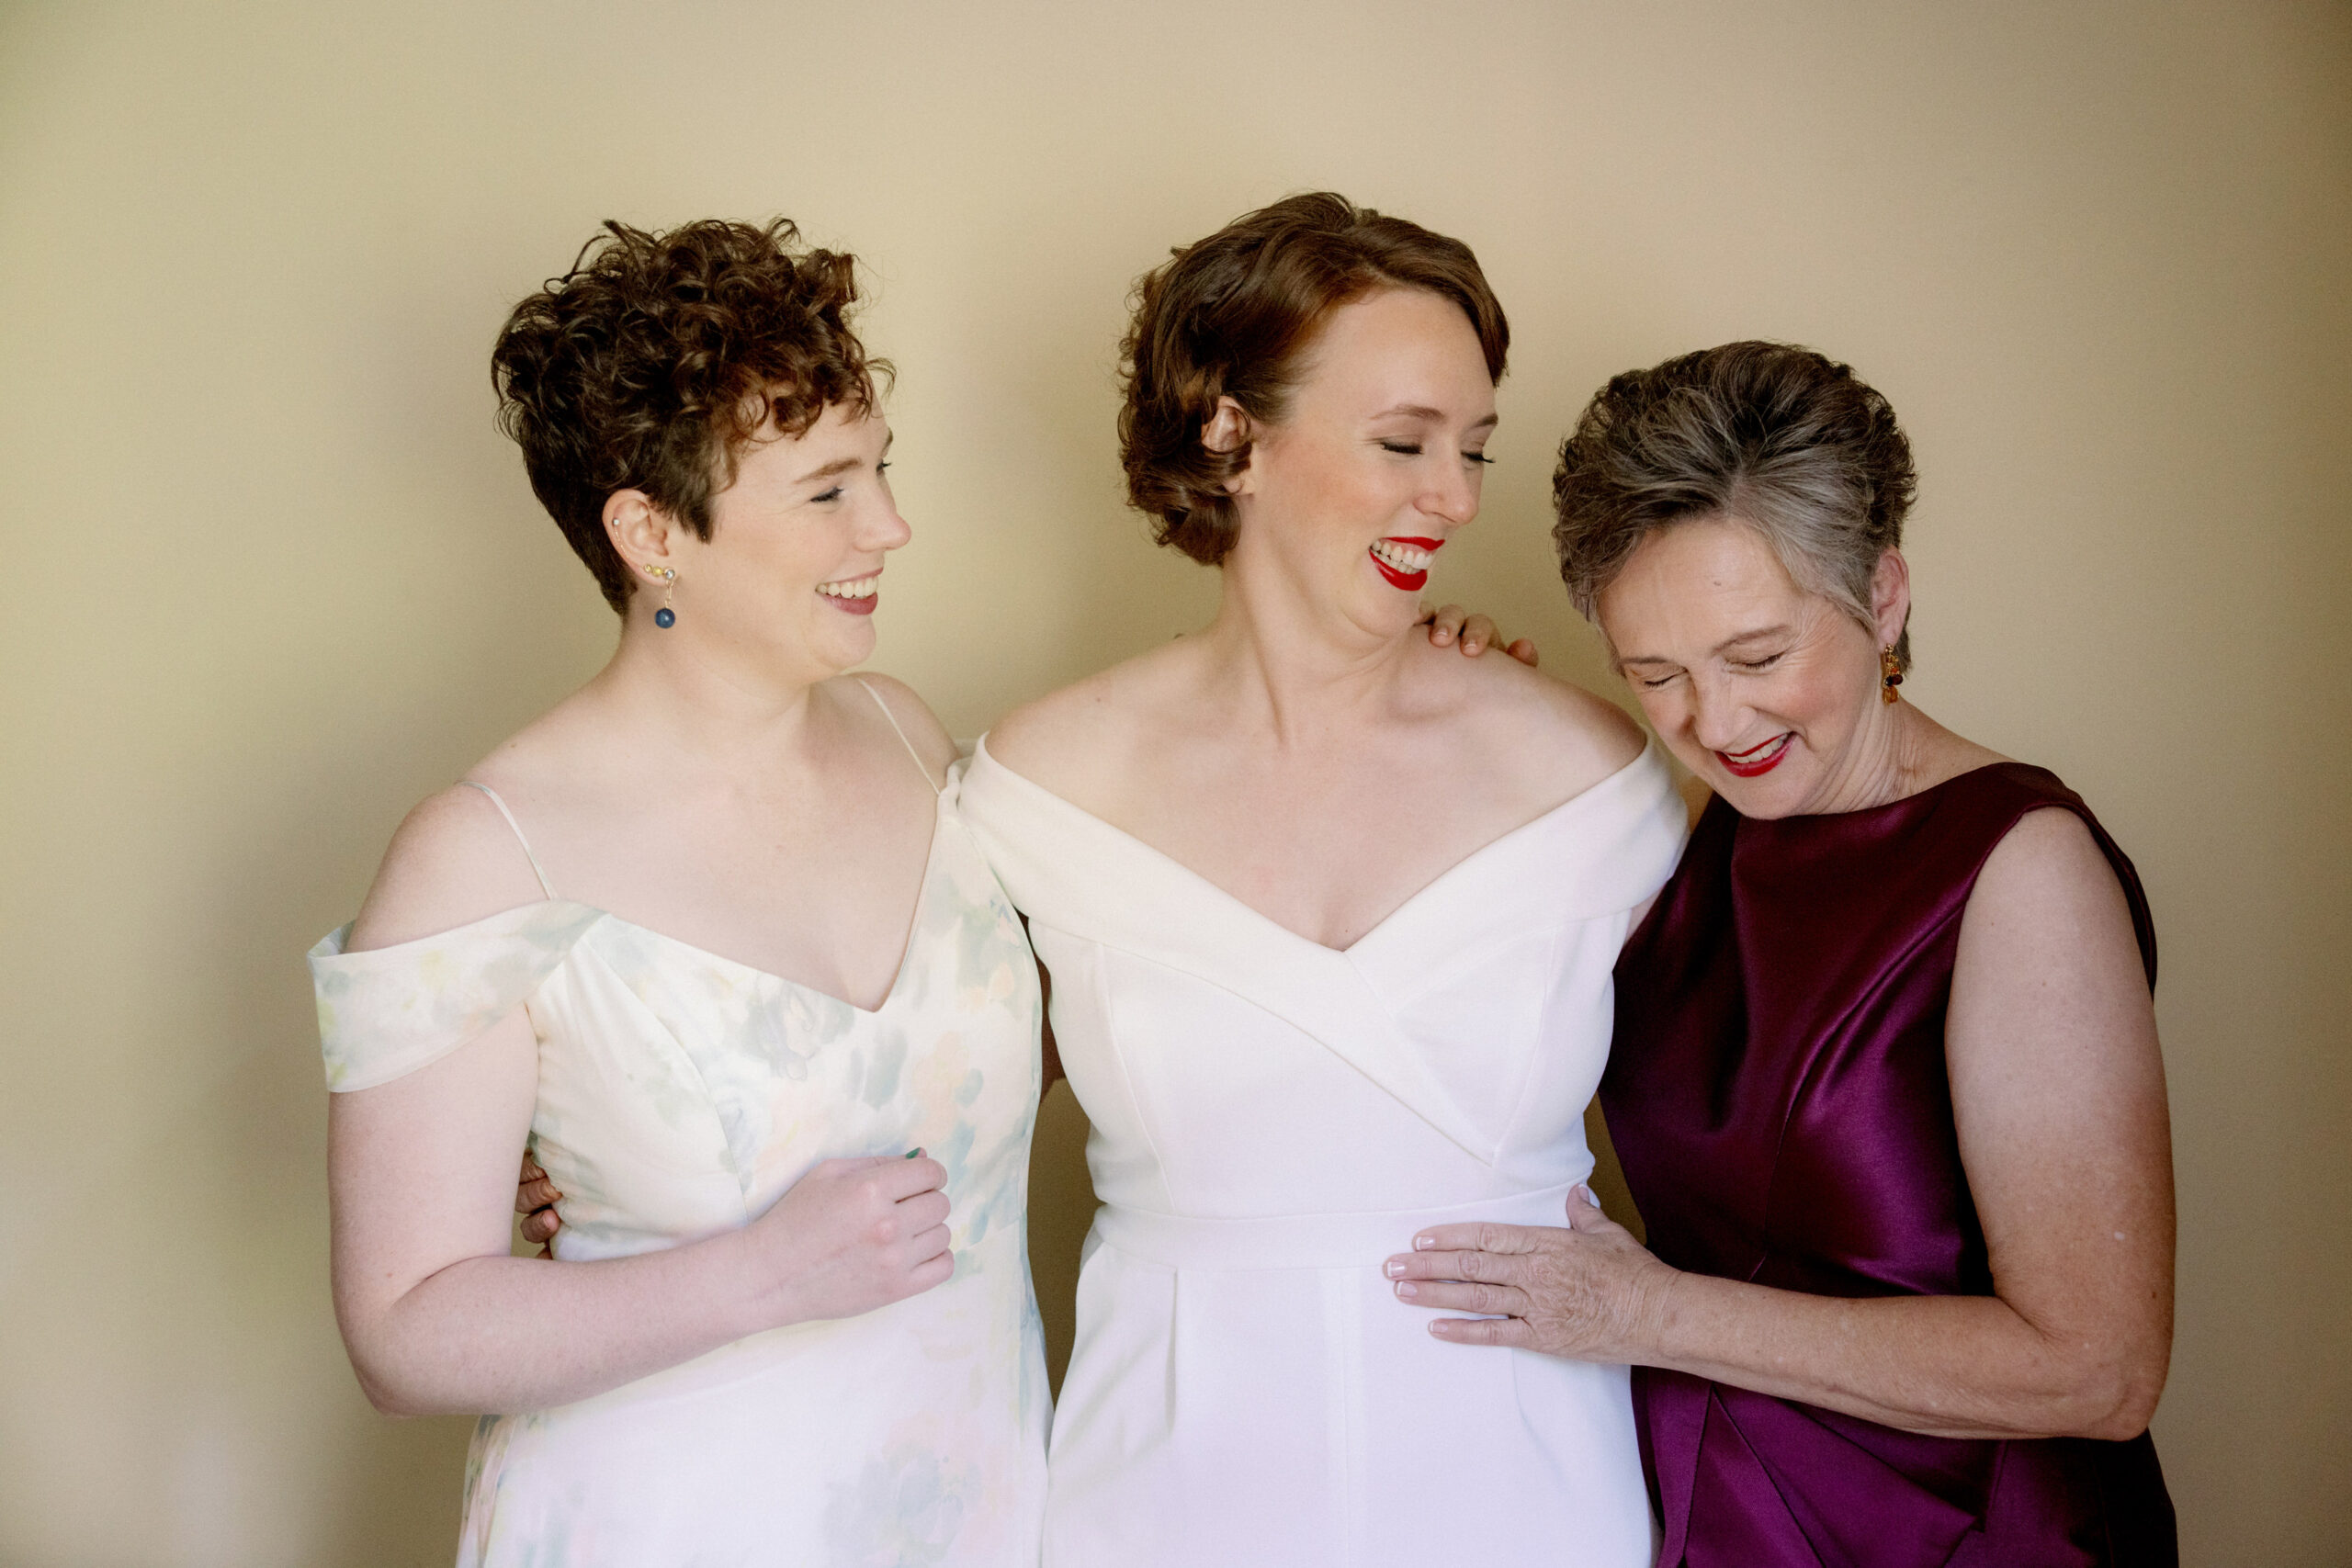 The bride, her sister and mother are smiling lovingly together. Wedding poses image by Jenny Fu Studio